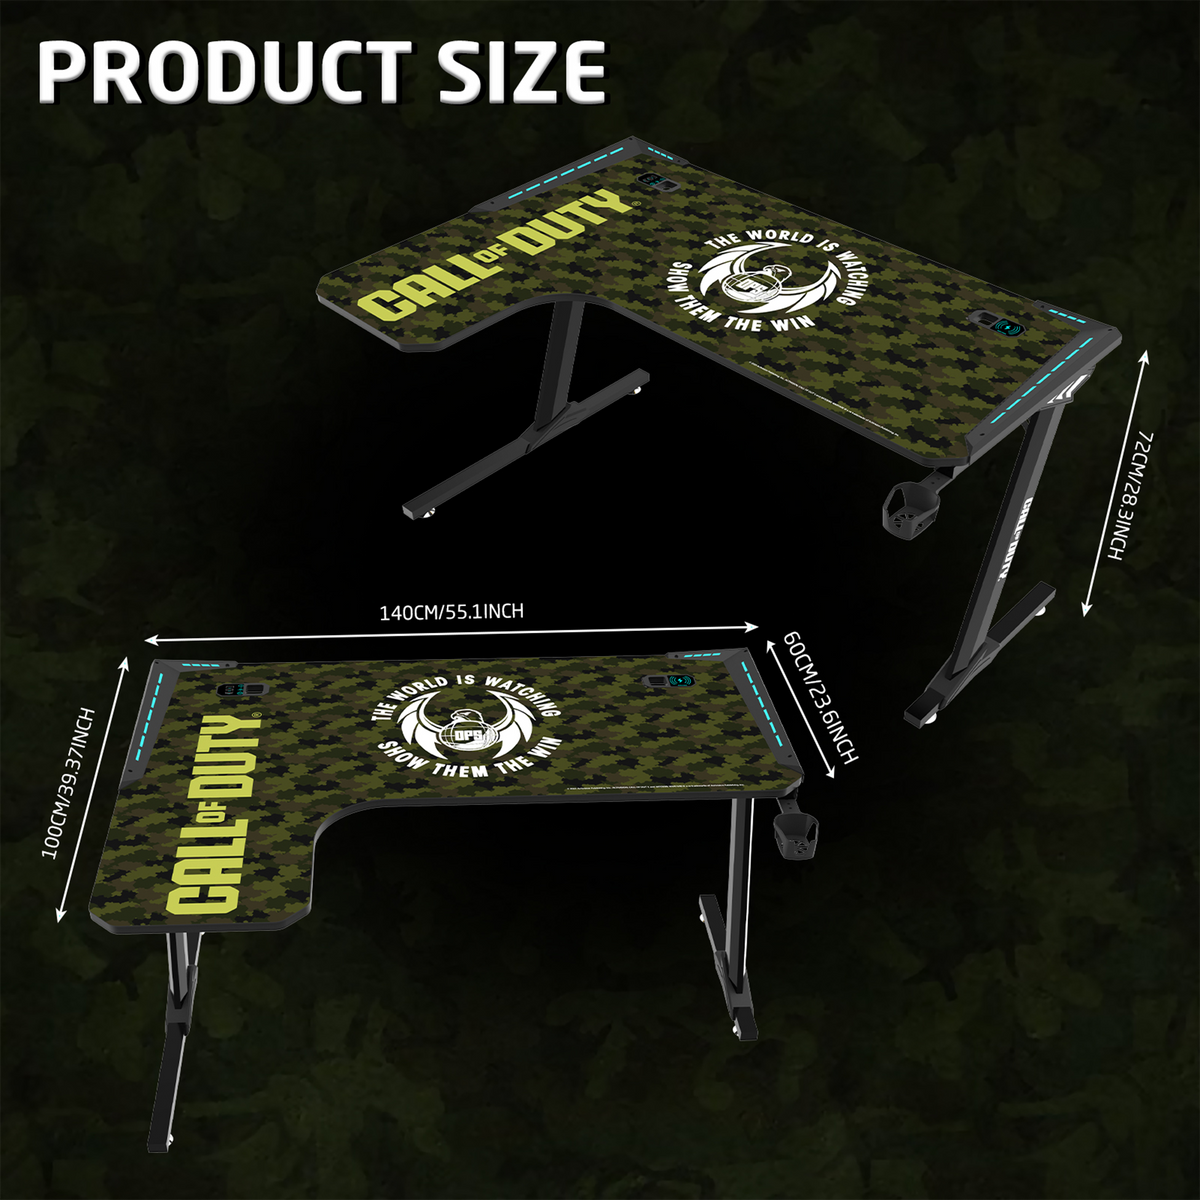 Call Of Duty (COD) x GAMEON Phantom XL-L Series L-Shaped RGB Flowing Light Gaming Desk (Size: 1400-600-720mm) With (800*300*3mm - Mouse pad), Headphone Hook, Cup Holder, Cable Management, Gamepad Holder, Qi Wireless Charger & USB Hub - Black/Green